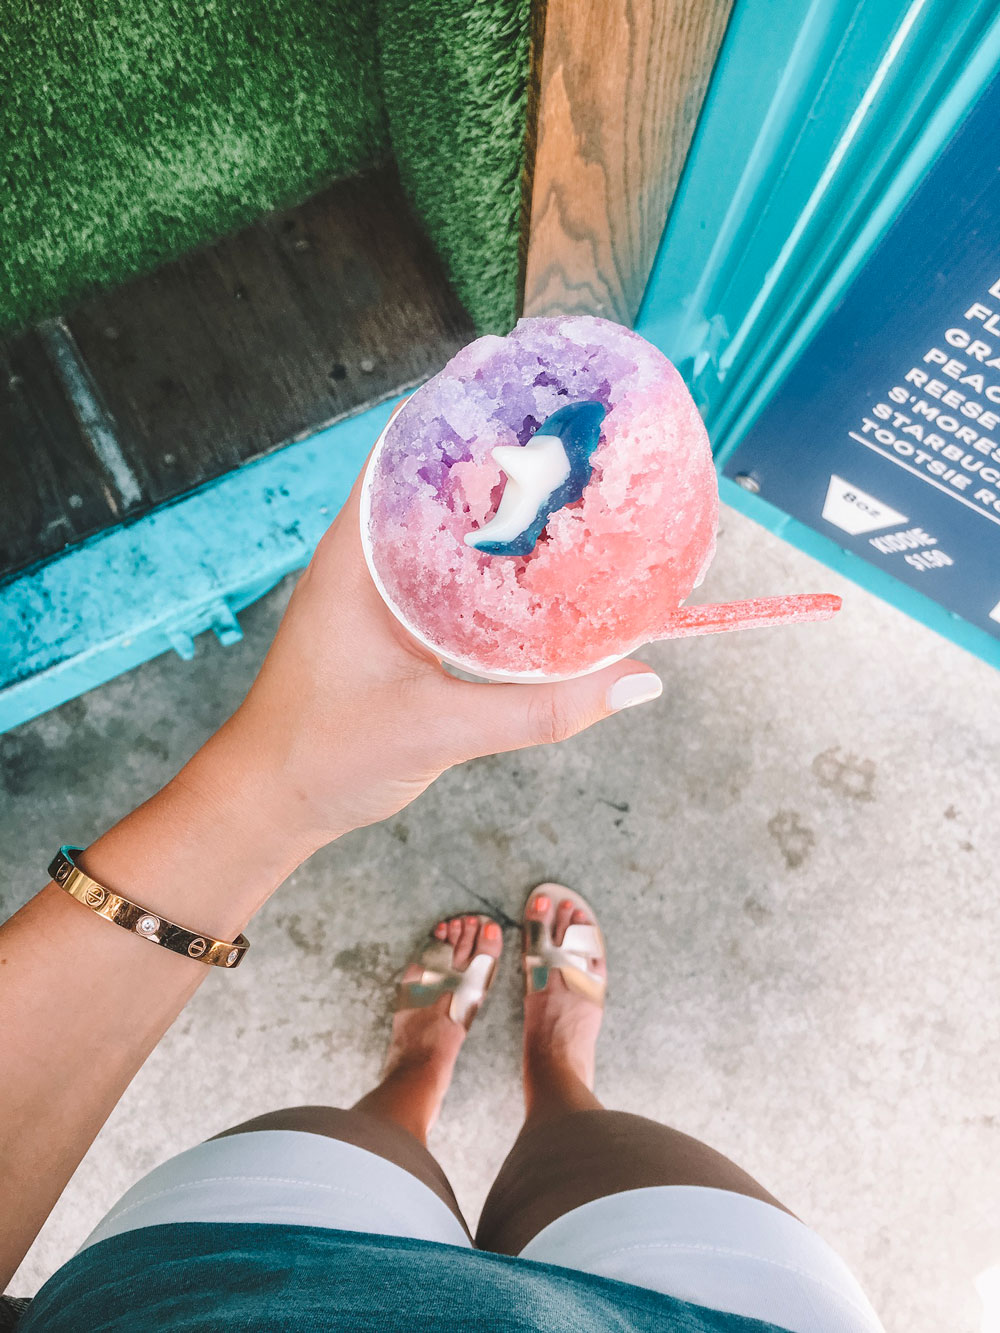 Oklahoma City's best snowcone is at Sasquatch Shaved Ice